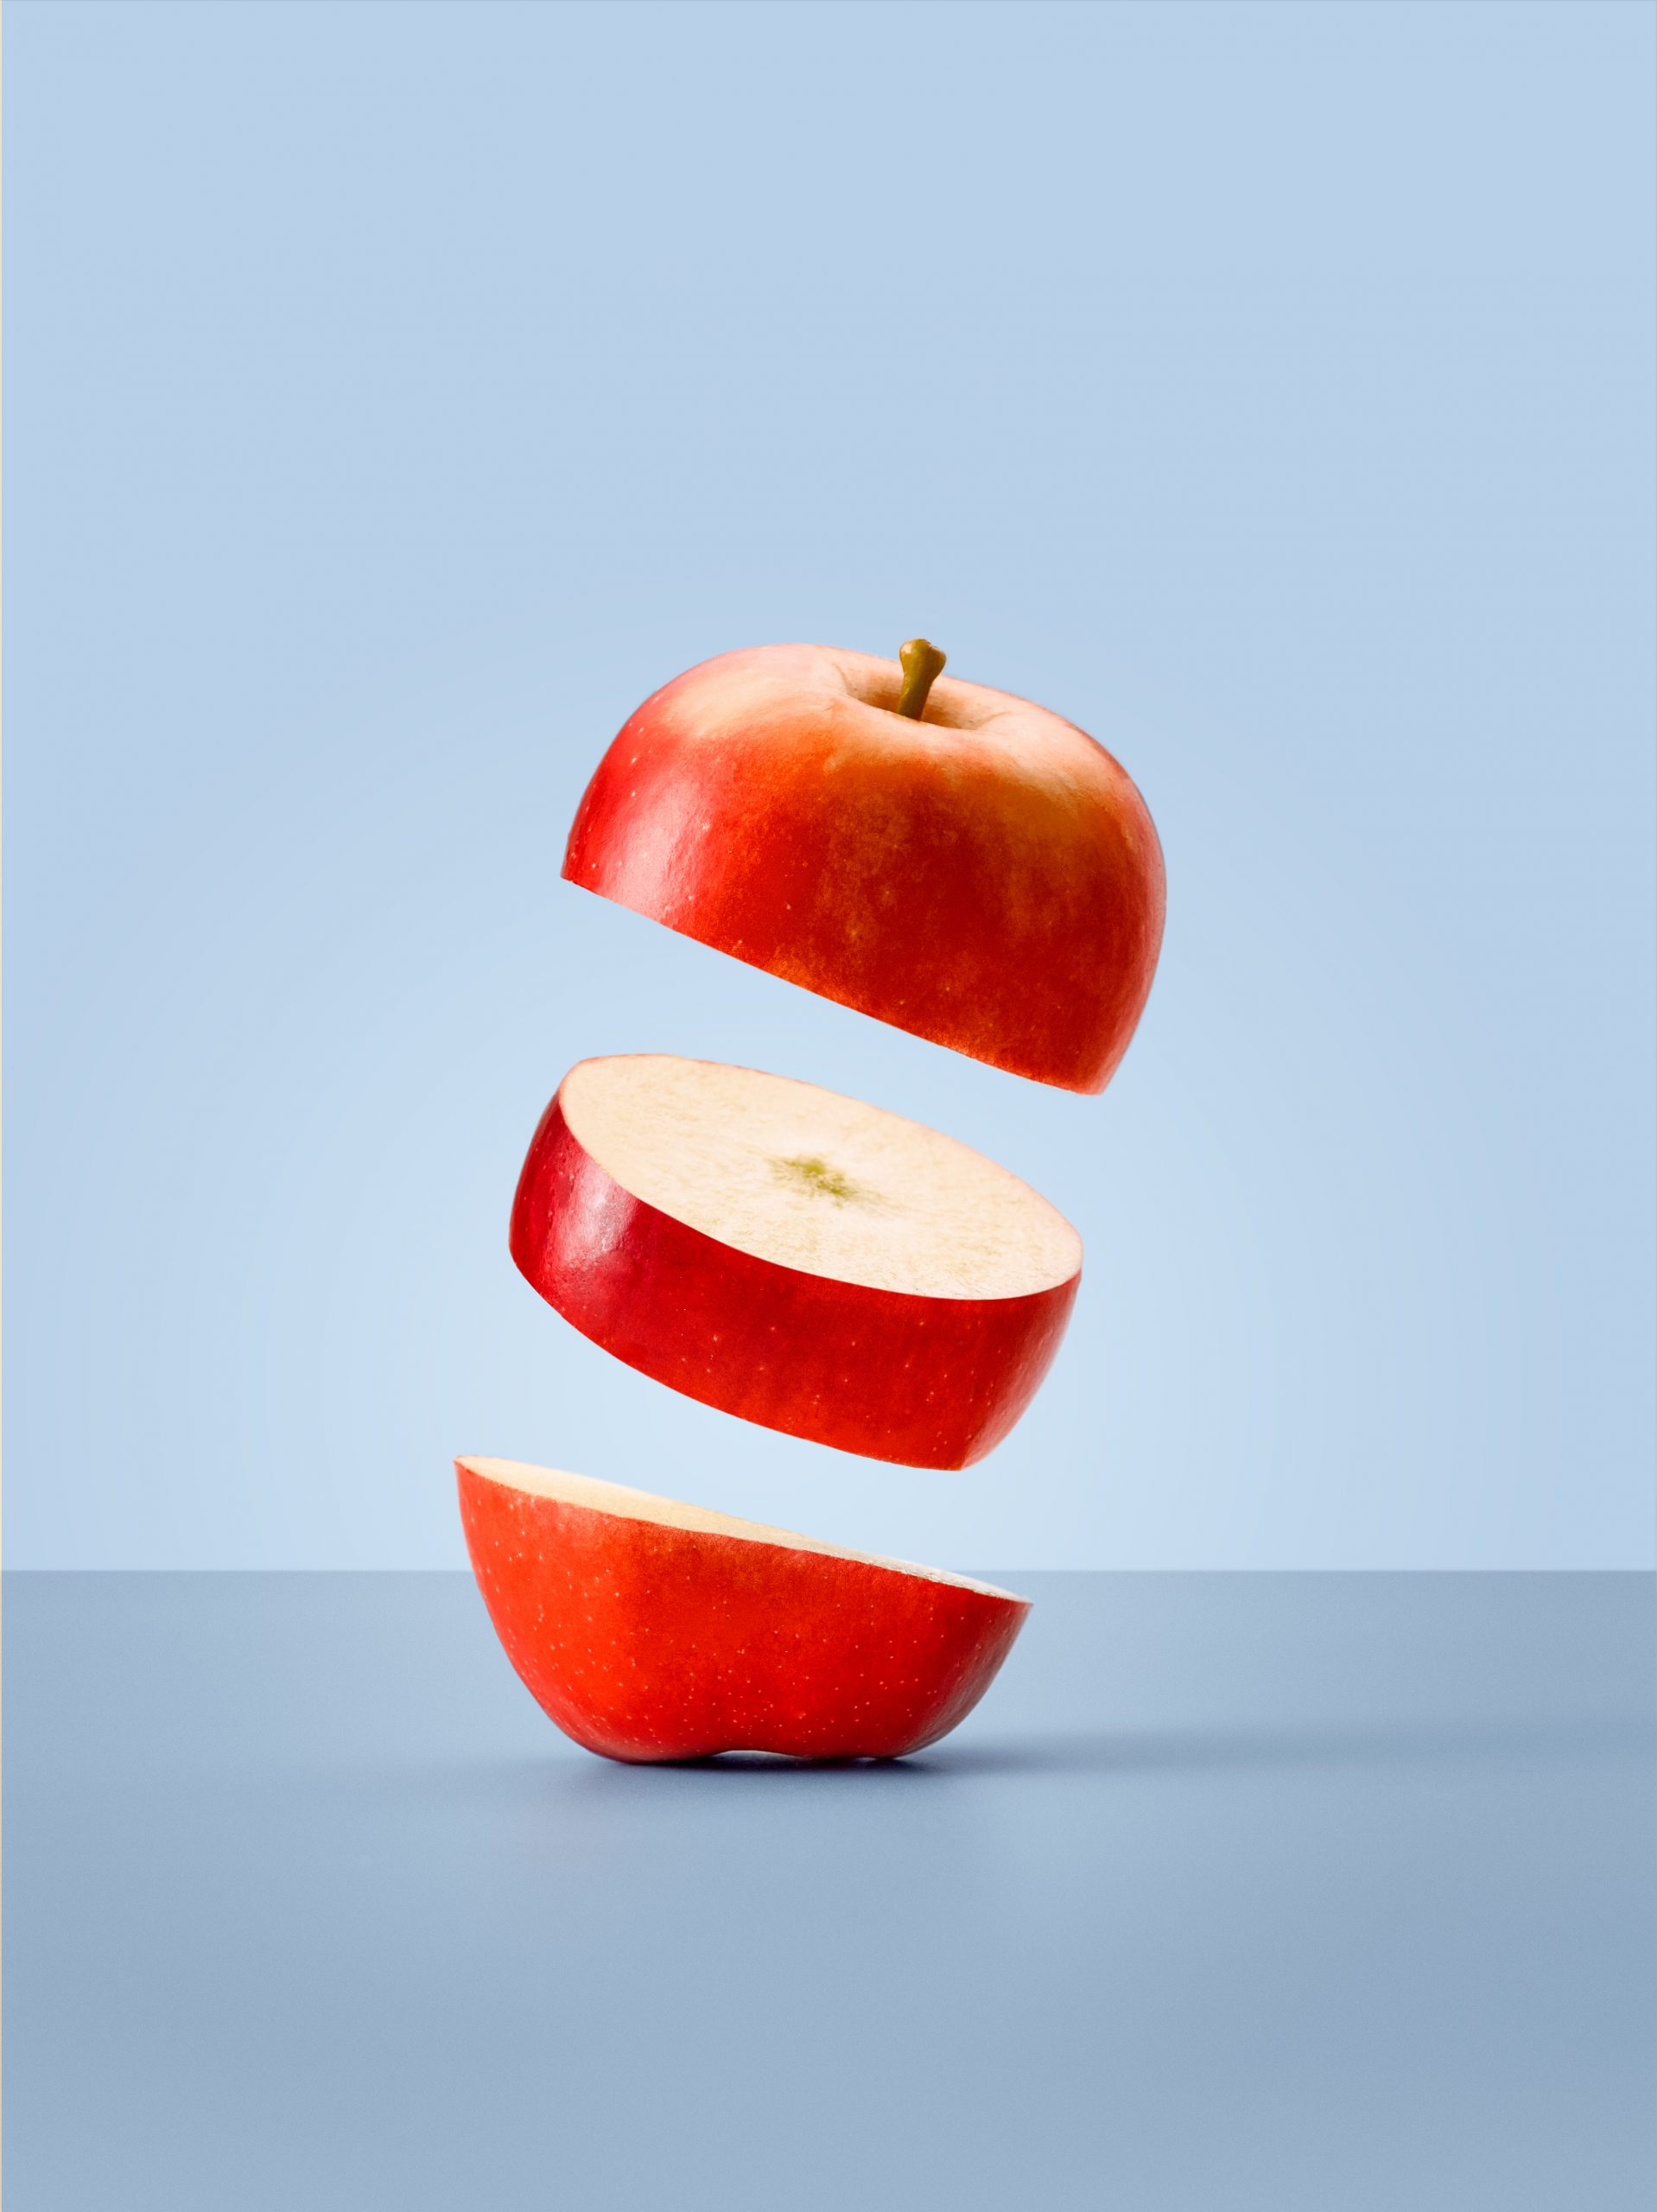 one rockit apple sliced into three parts floating slightly higher than the part below